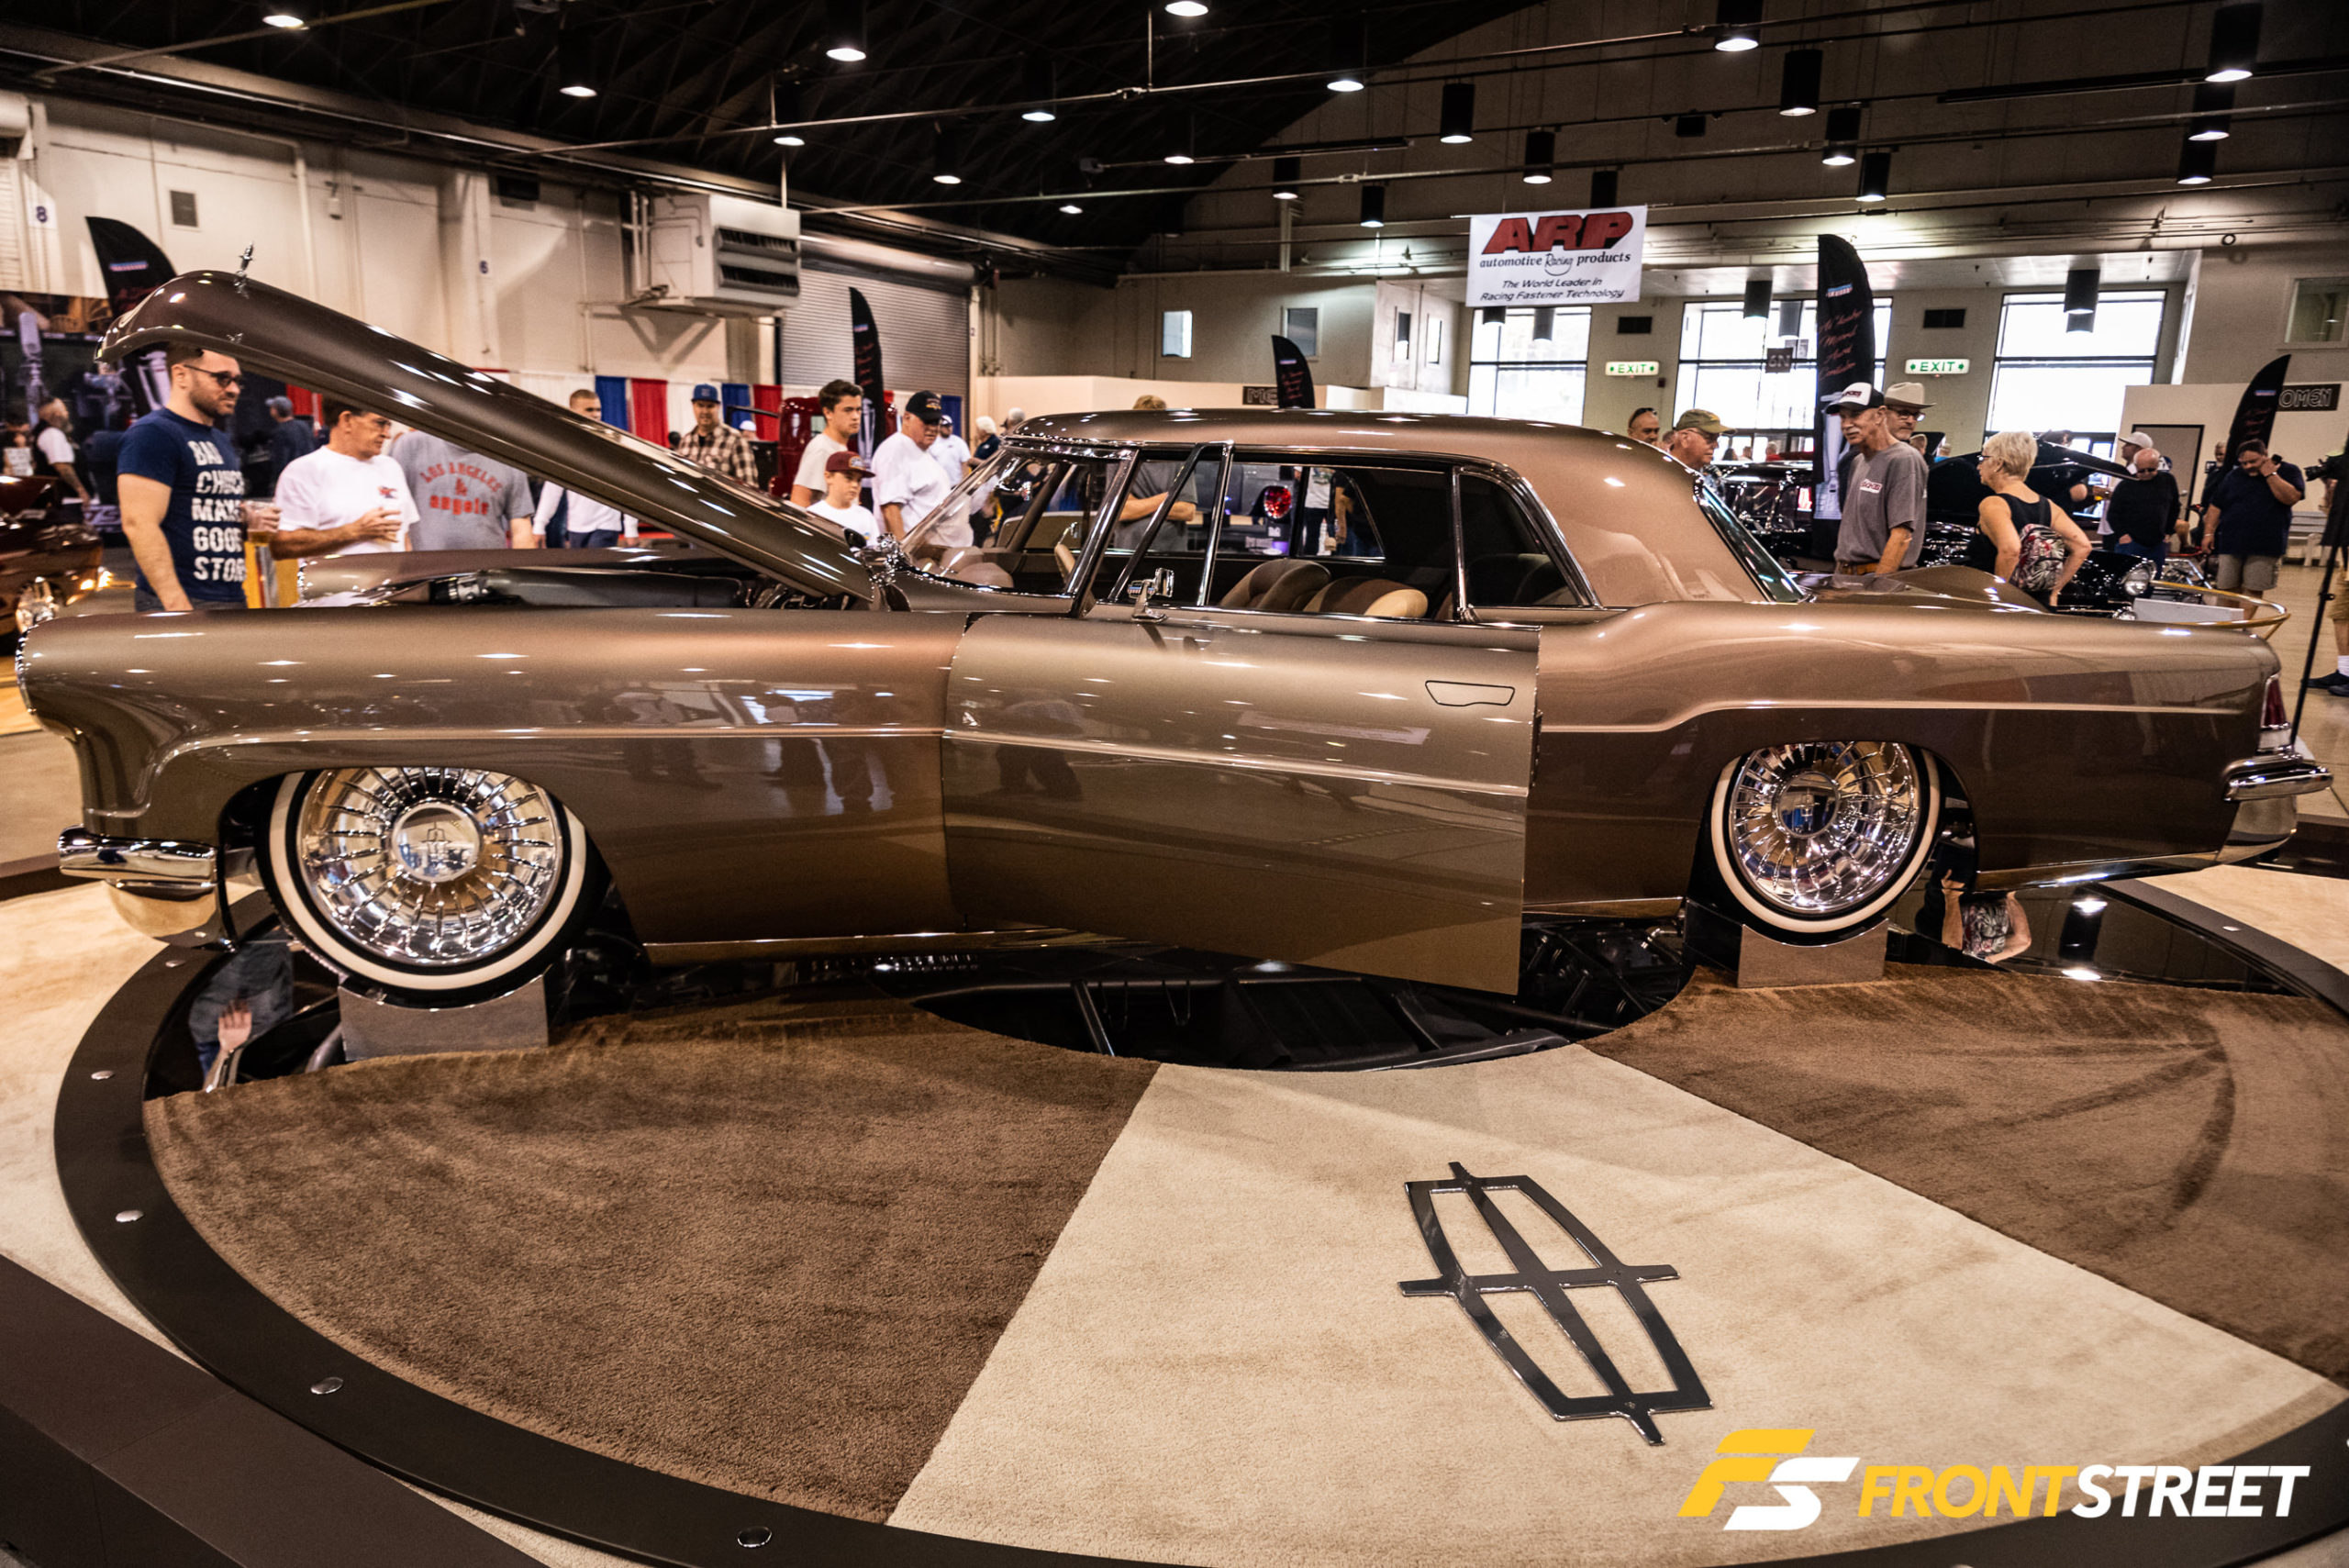 The Stunning Vehicles Of The 2020 Grand National Roadster Show